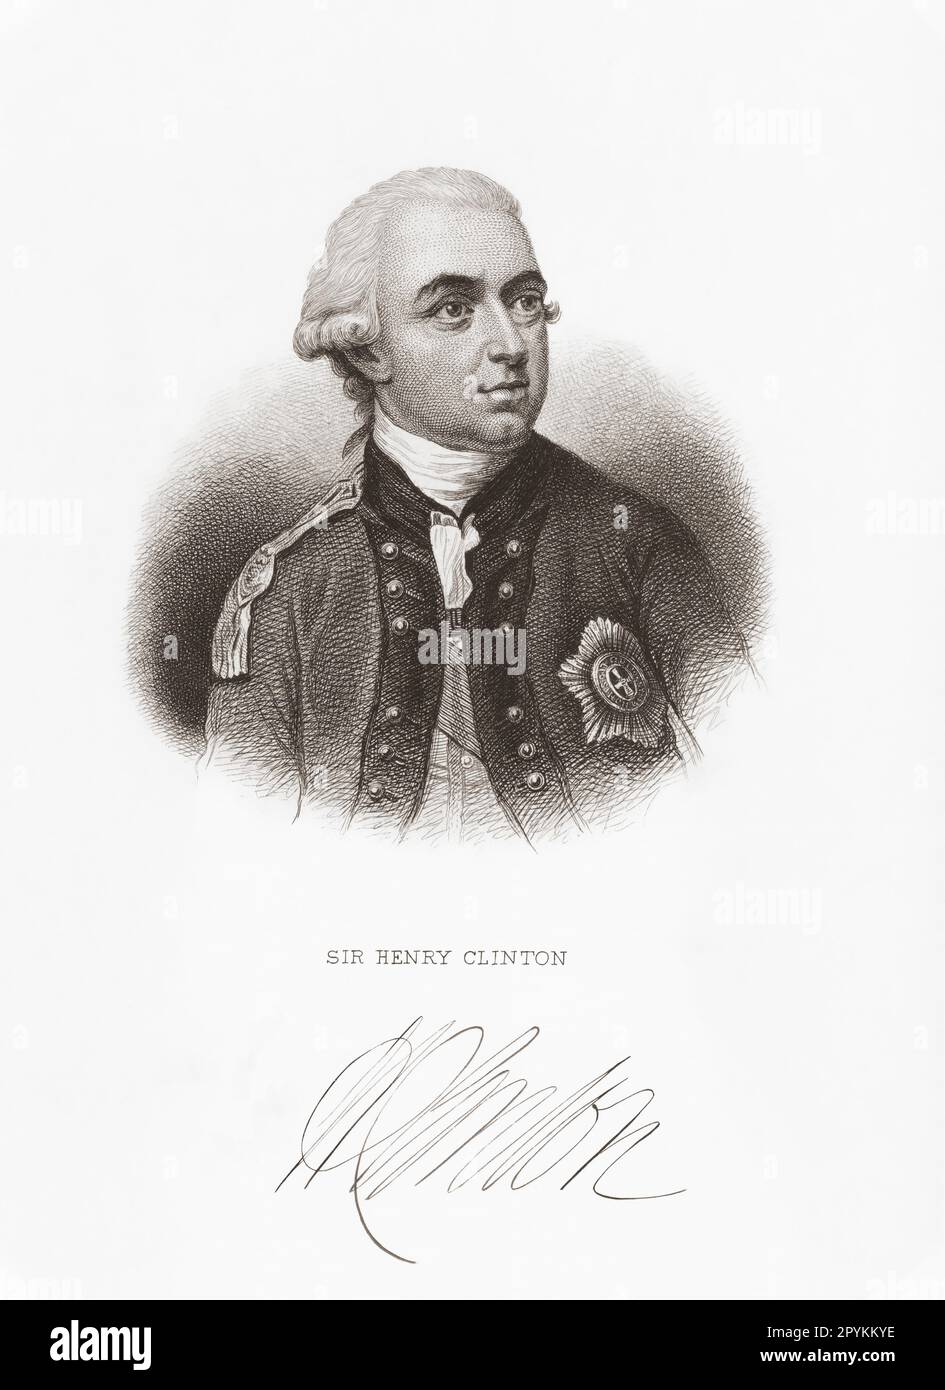 General Sir Henry Clinton, 1730 to 1795. British army officer and politician during the American War of Independence.  After an 18th century portrait. Stock Photo